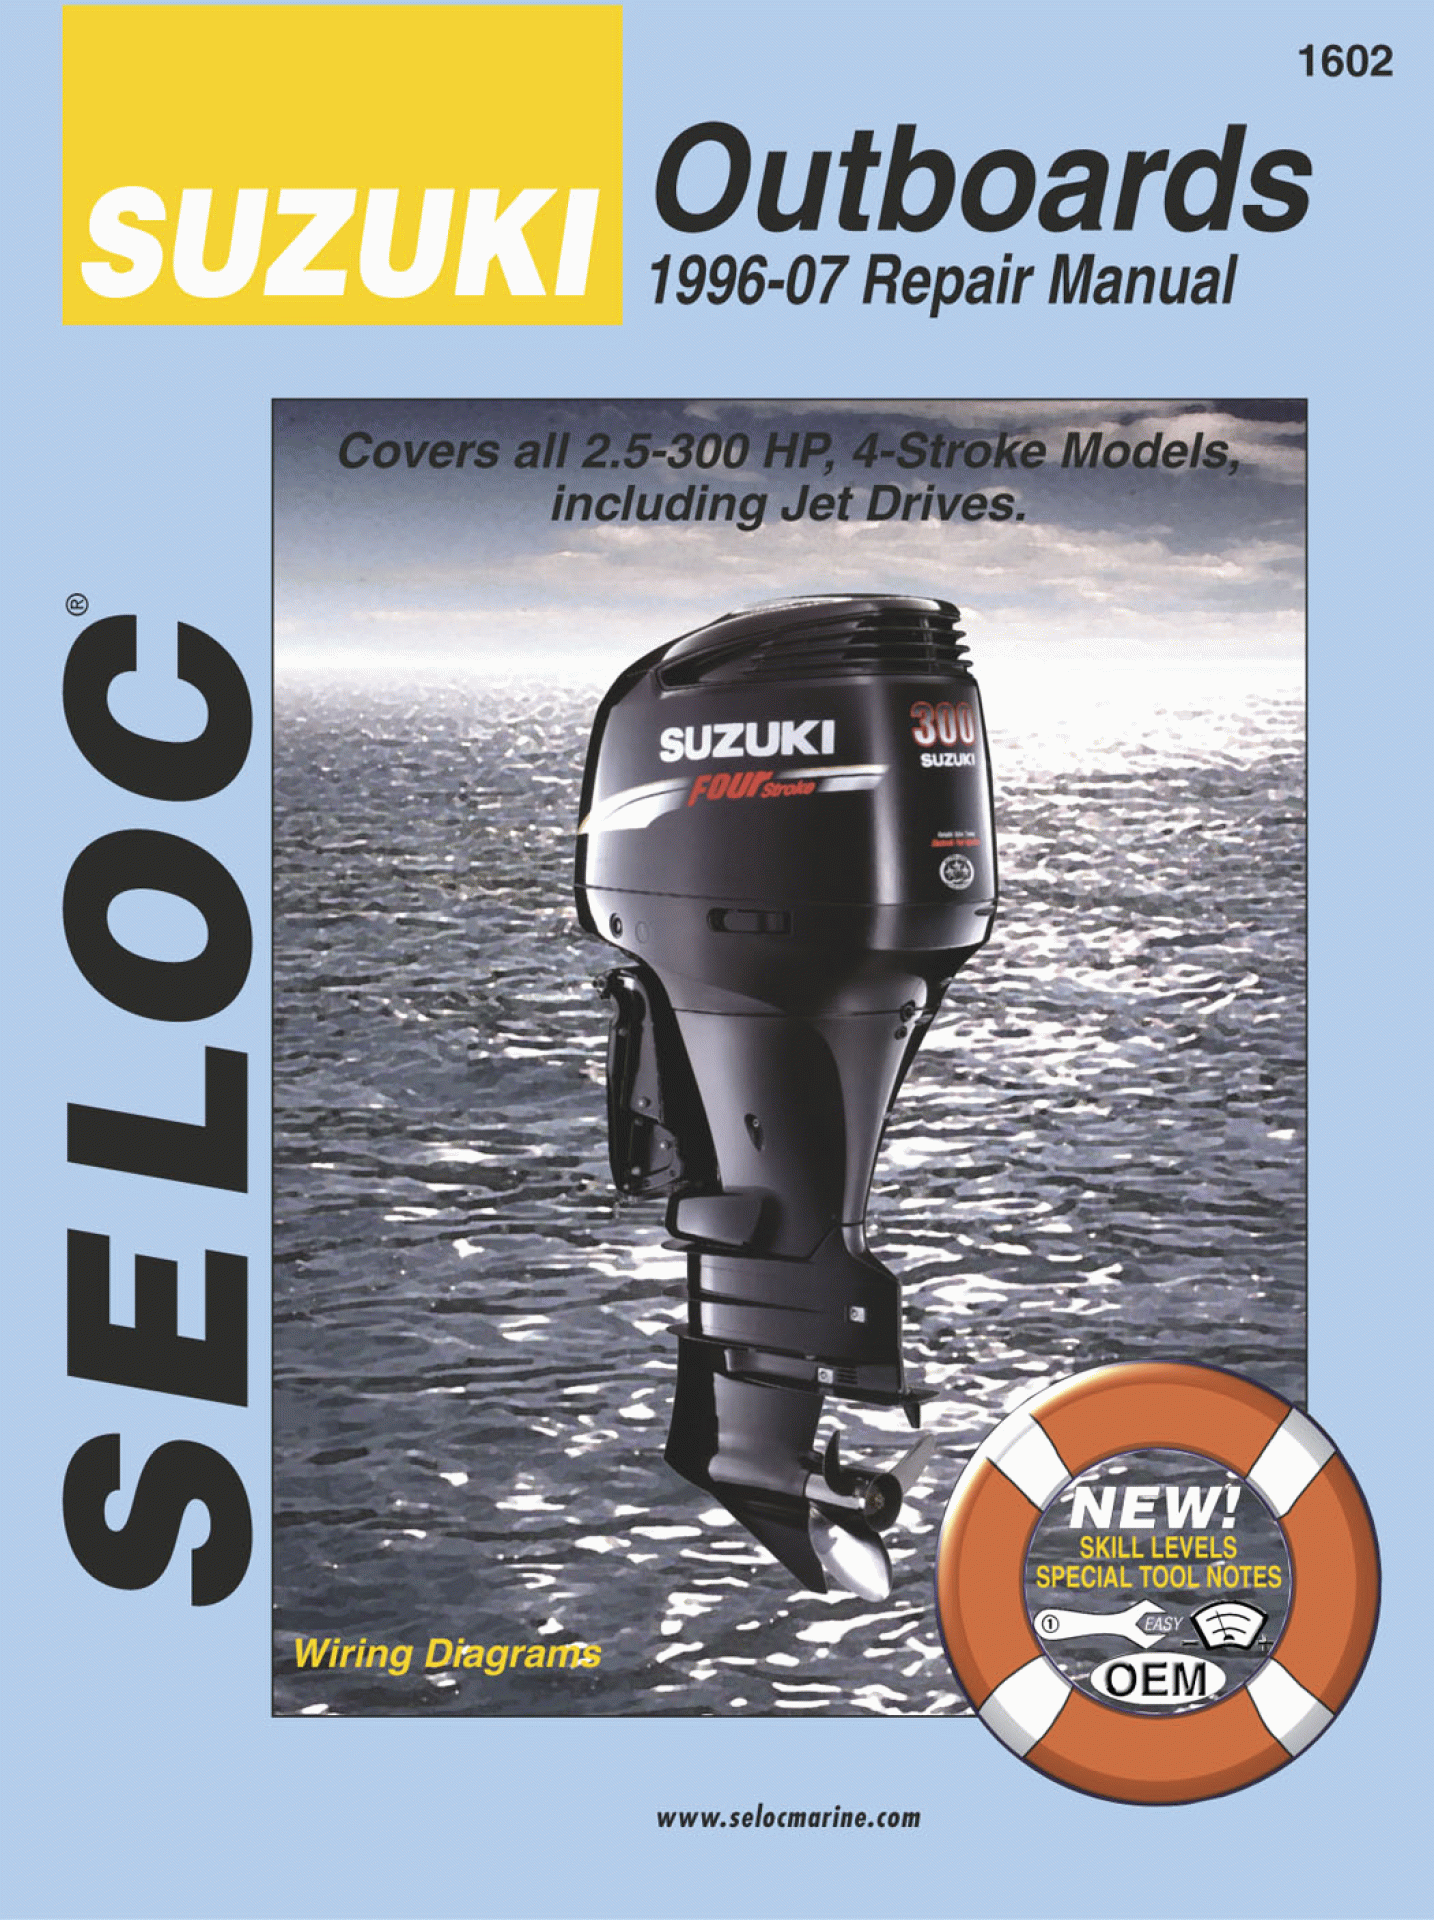 SELOC PUBLISHING | 18-01602 | REPAIR MANUAL Suzuki Outboards All 4-Stroke Engines 1996-07